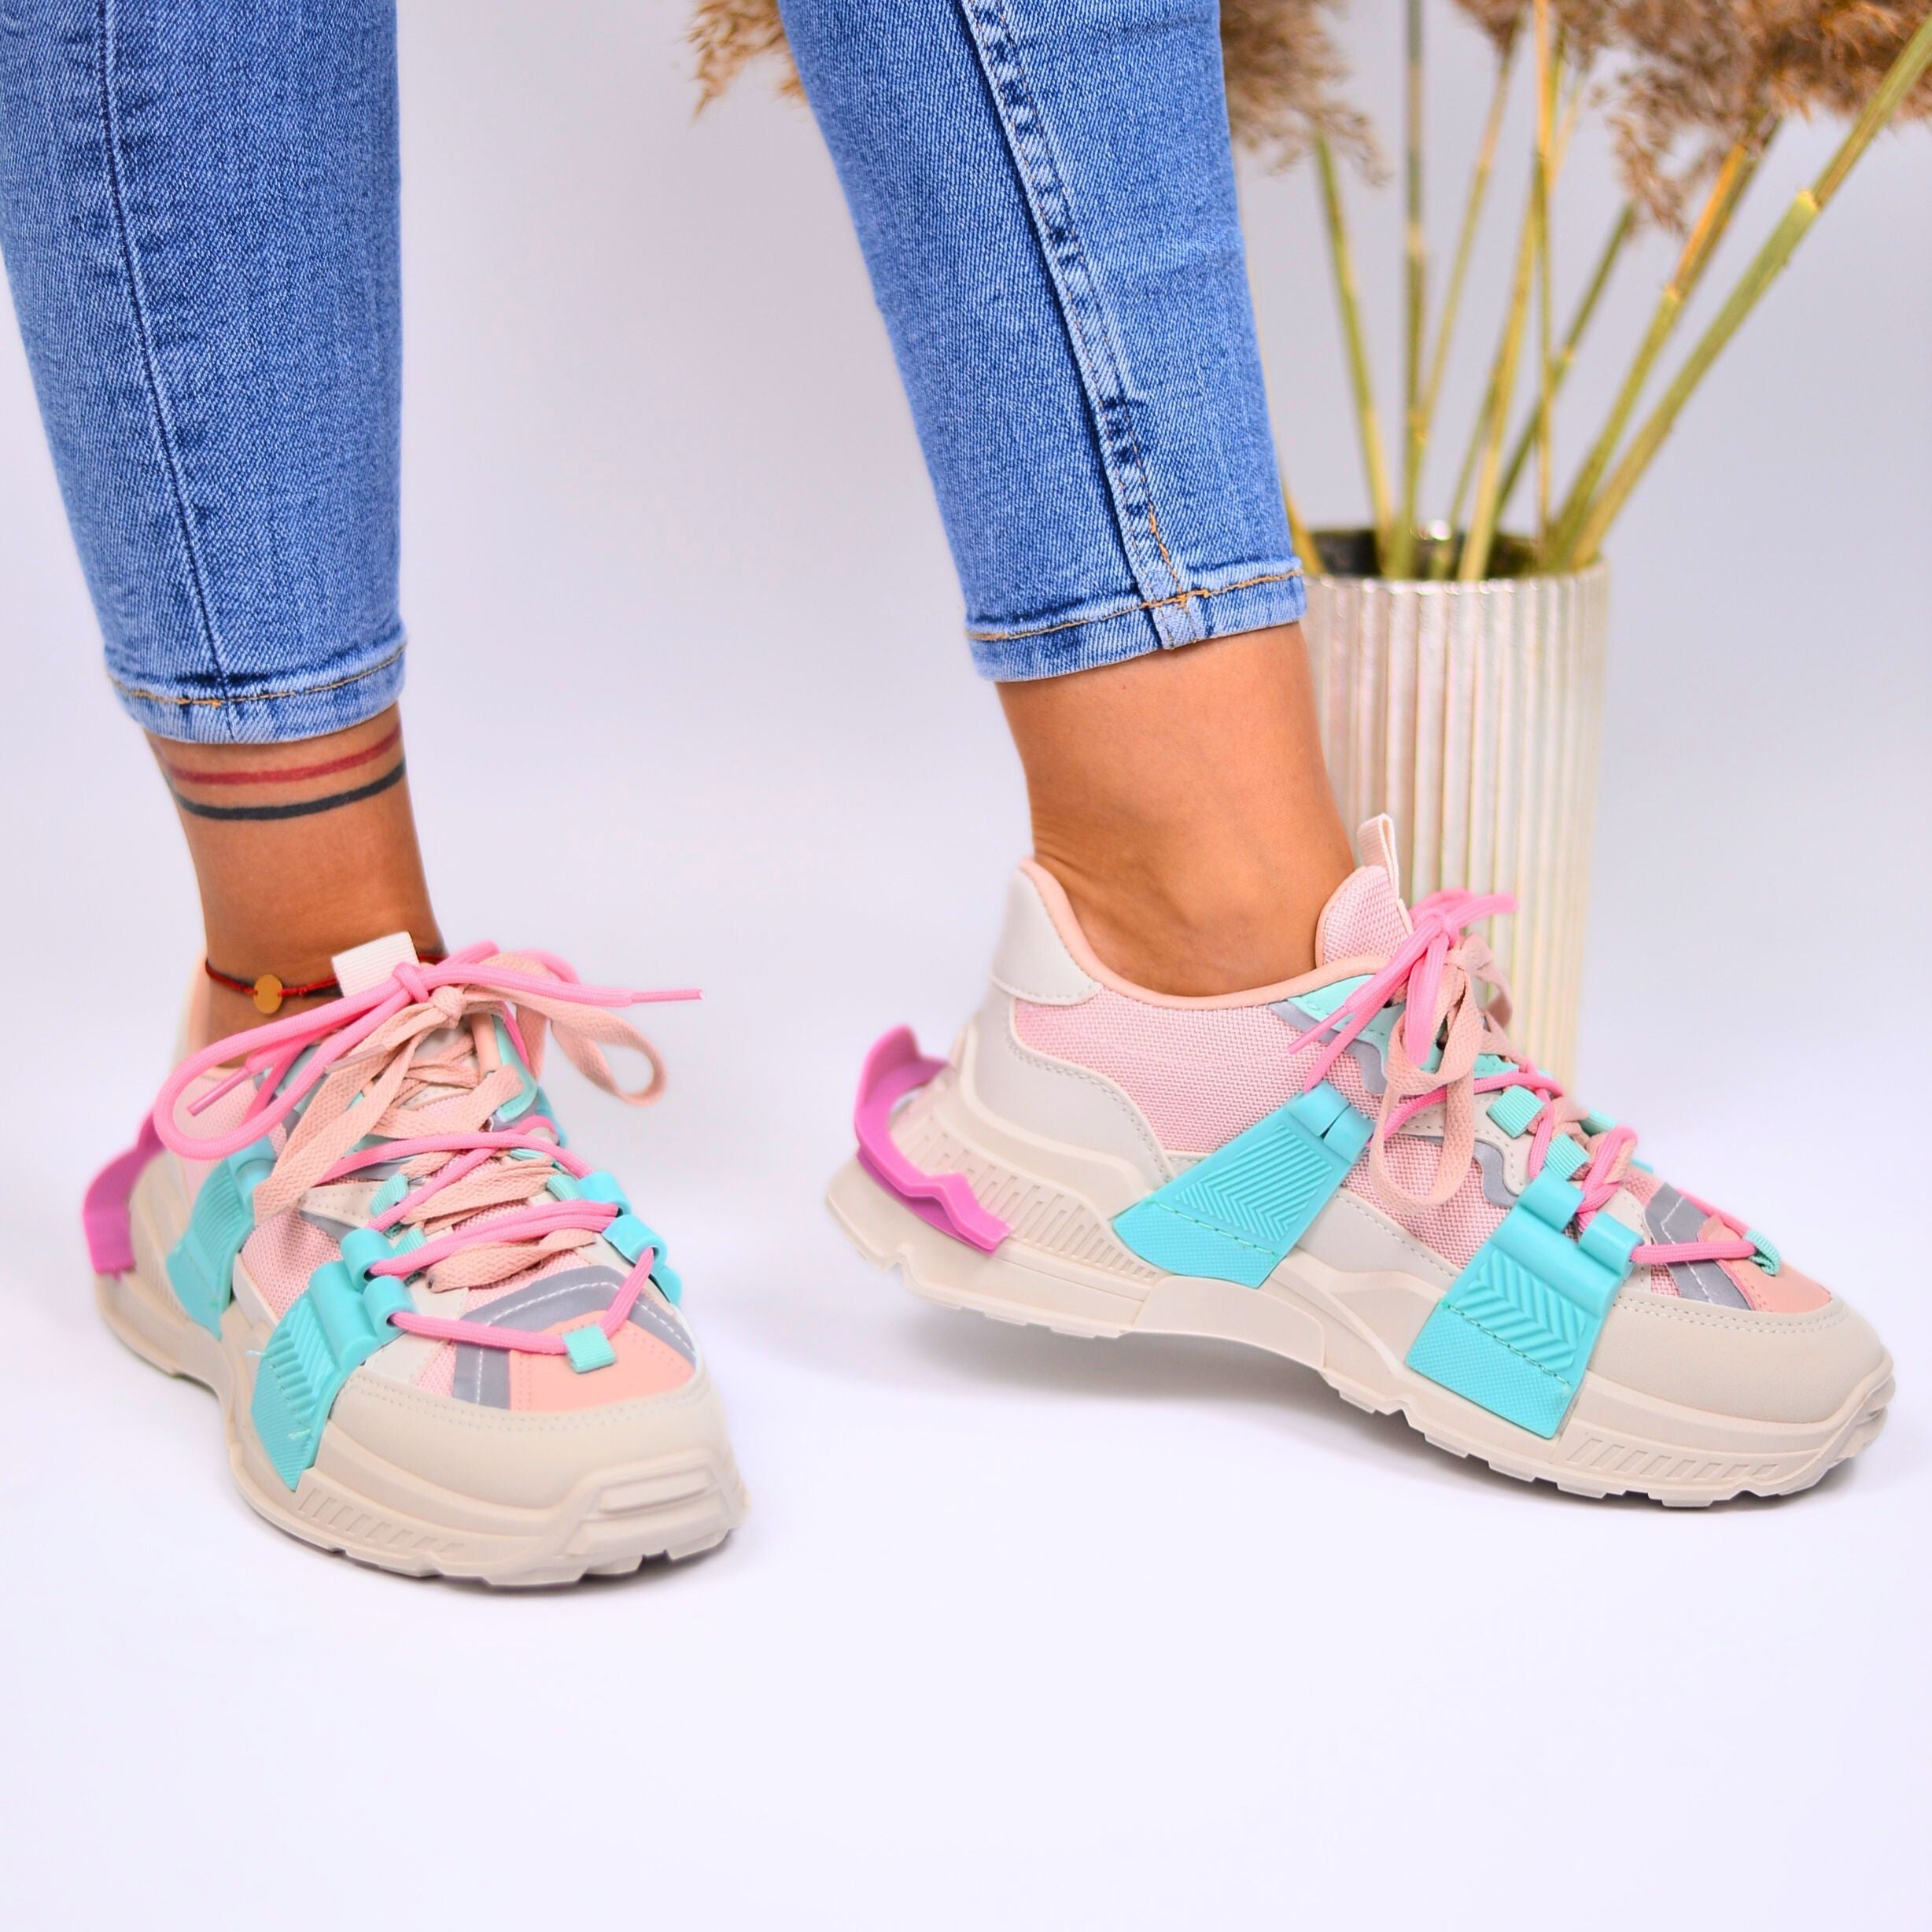 Women's Turquoise Dolce Sneakers Made Of Ecological Leather And Textile Material